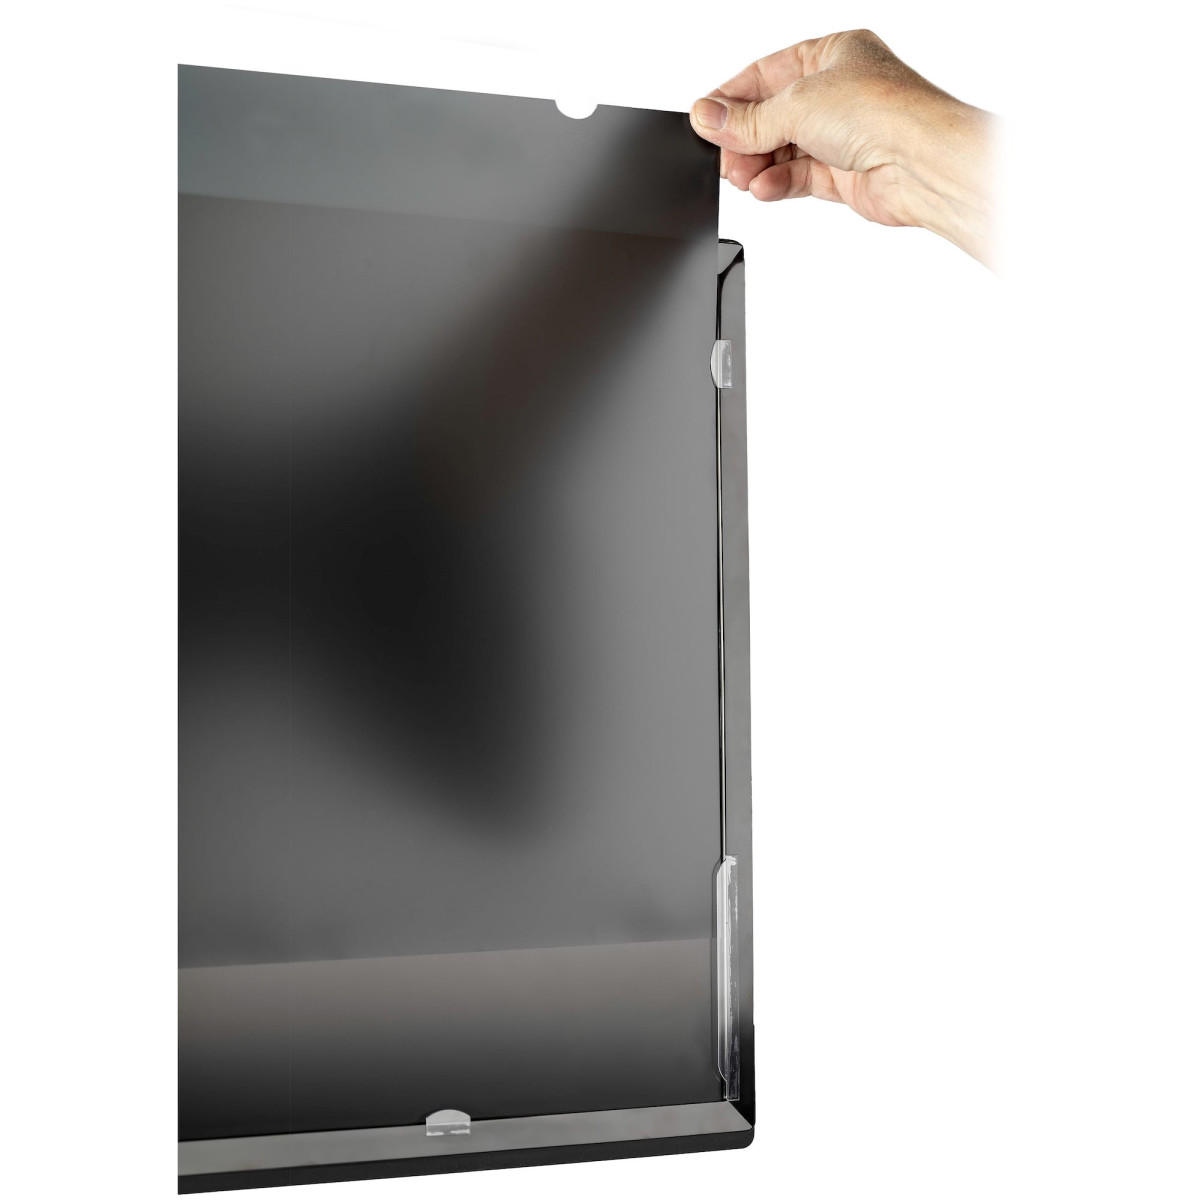 23 inch Monitor Privacy Screen Filter